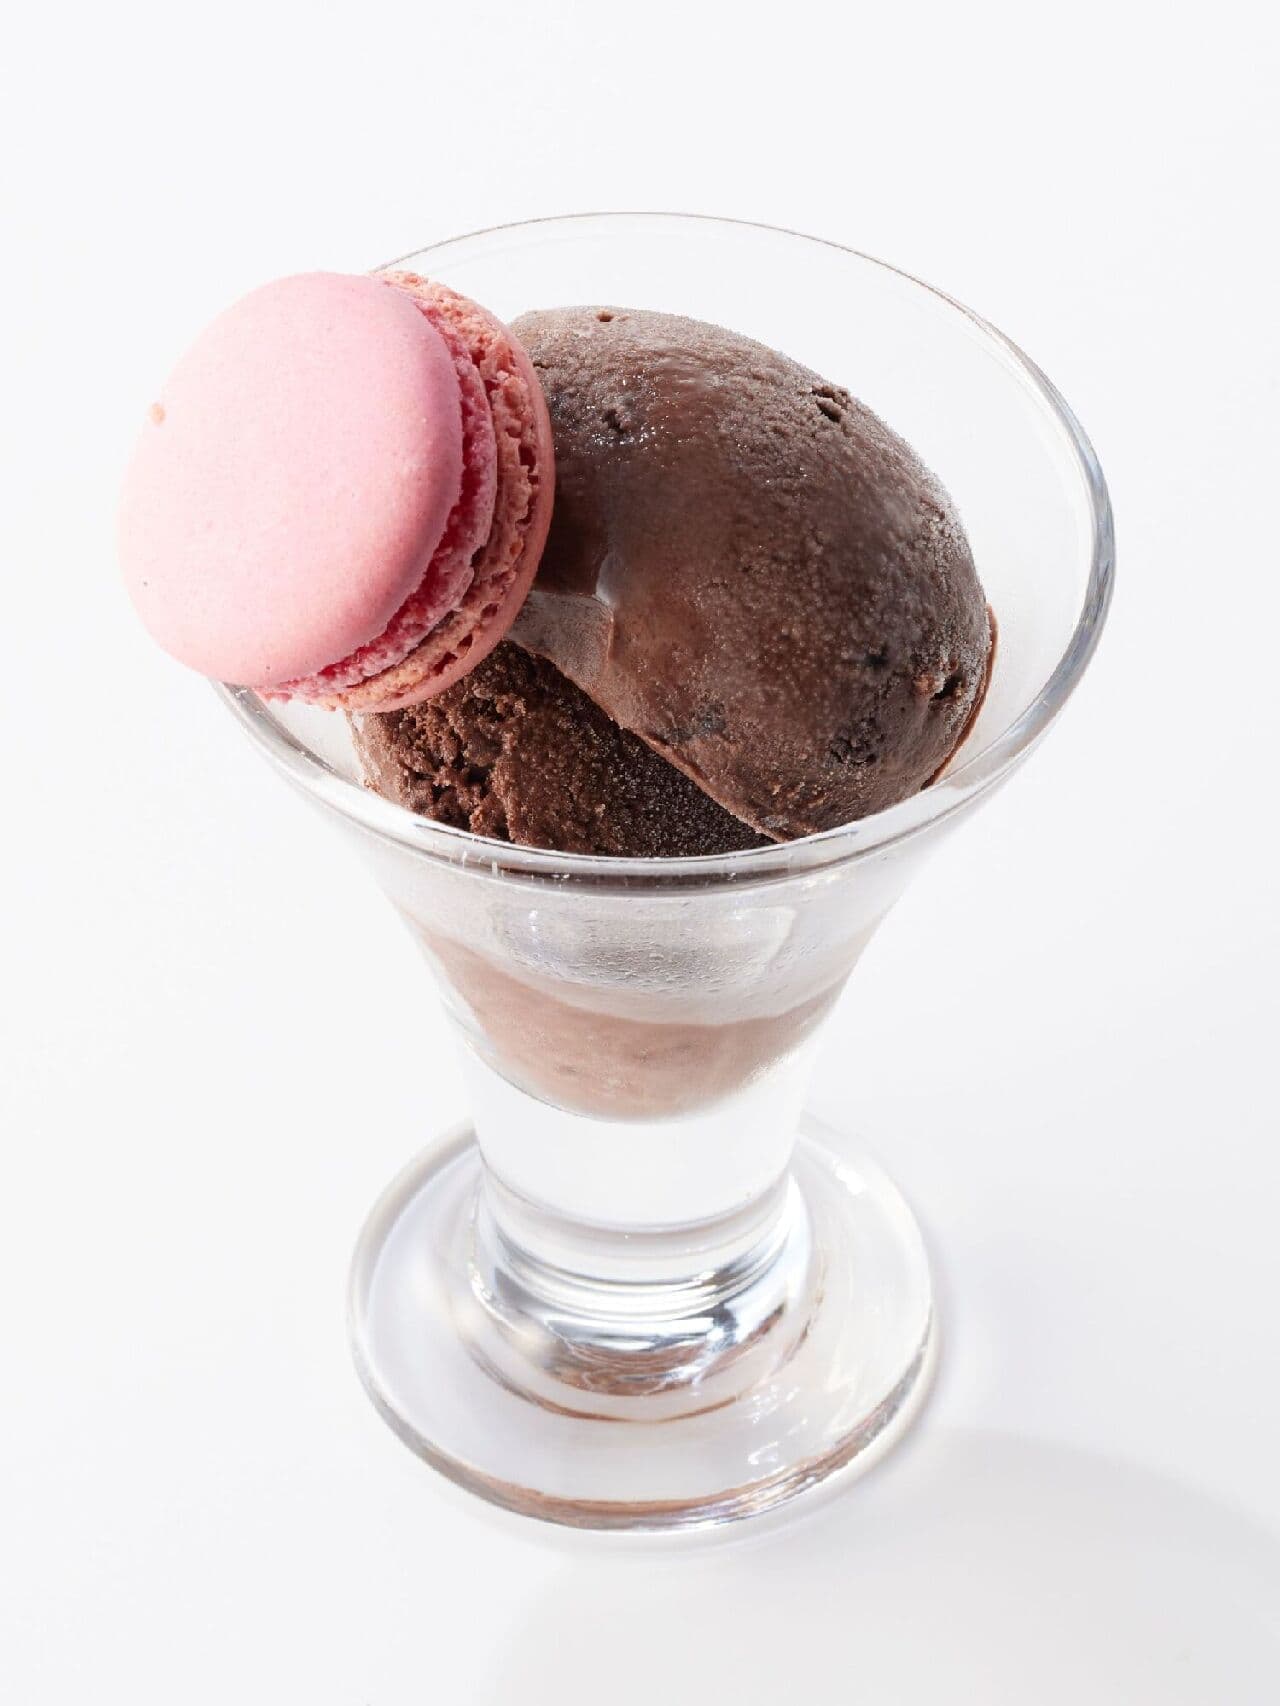 Three types of glass desserts combining ice cream and macaroons